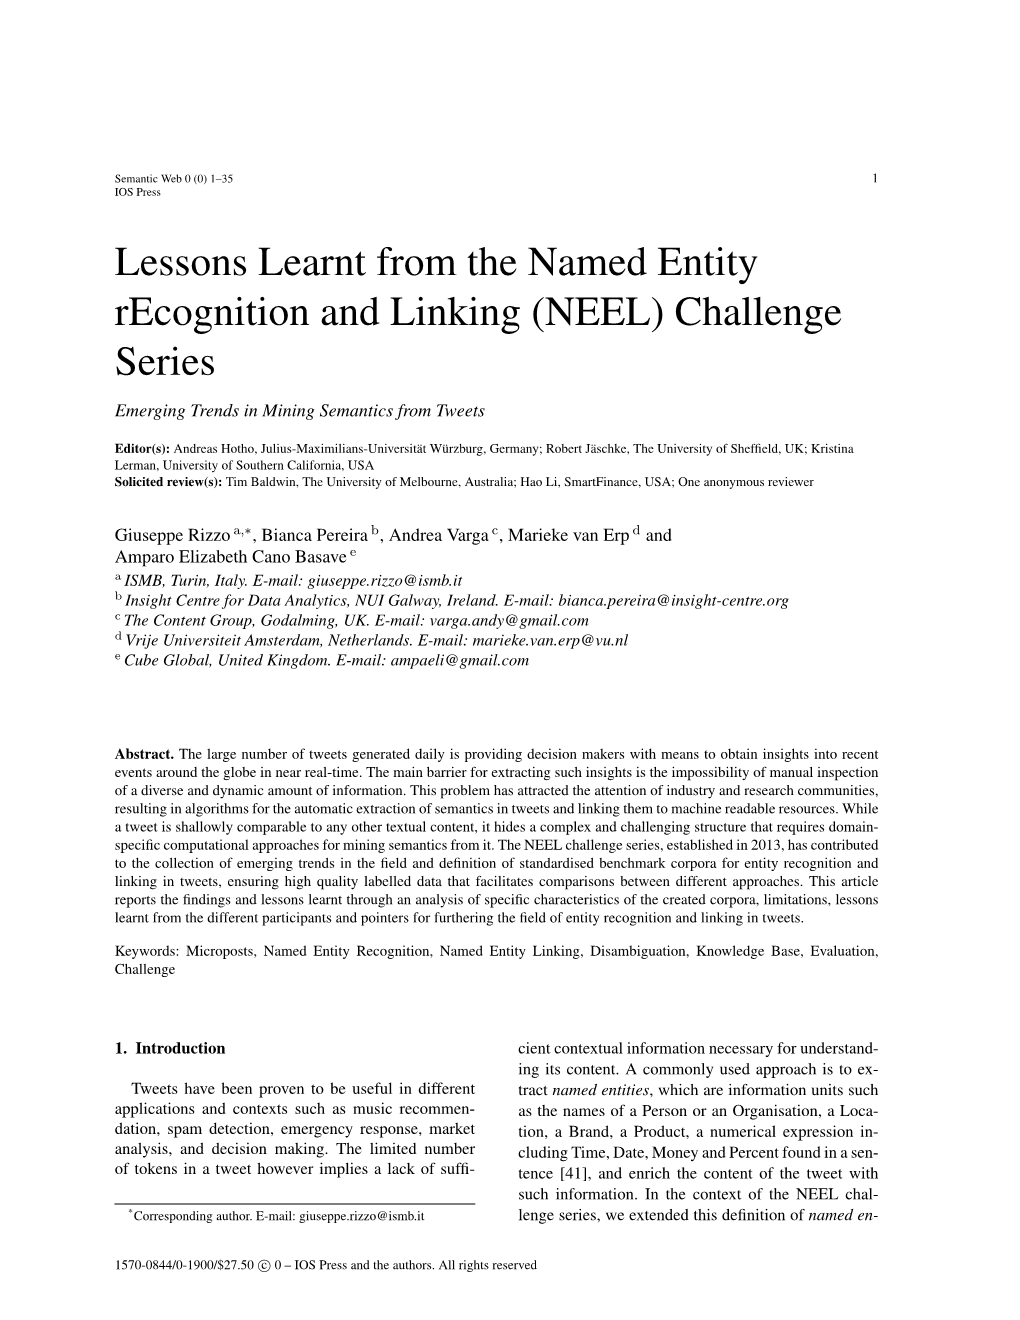 Lessons Learnt from the Named Entity Recognition and Linking (NEEL) Challenge Series Emerging Trends in Mining Semantics from Tweets